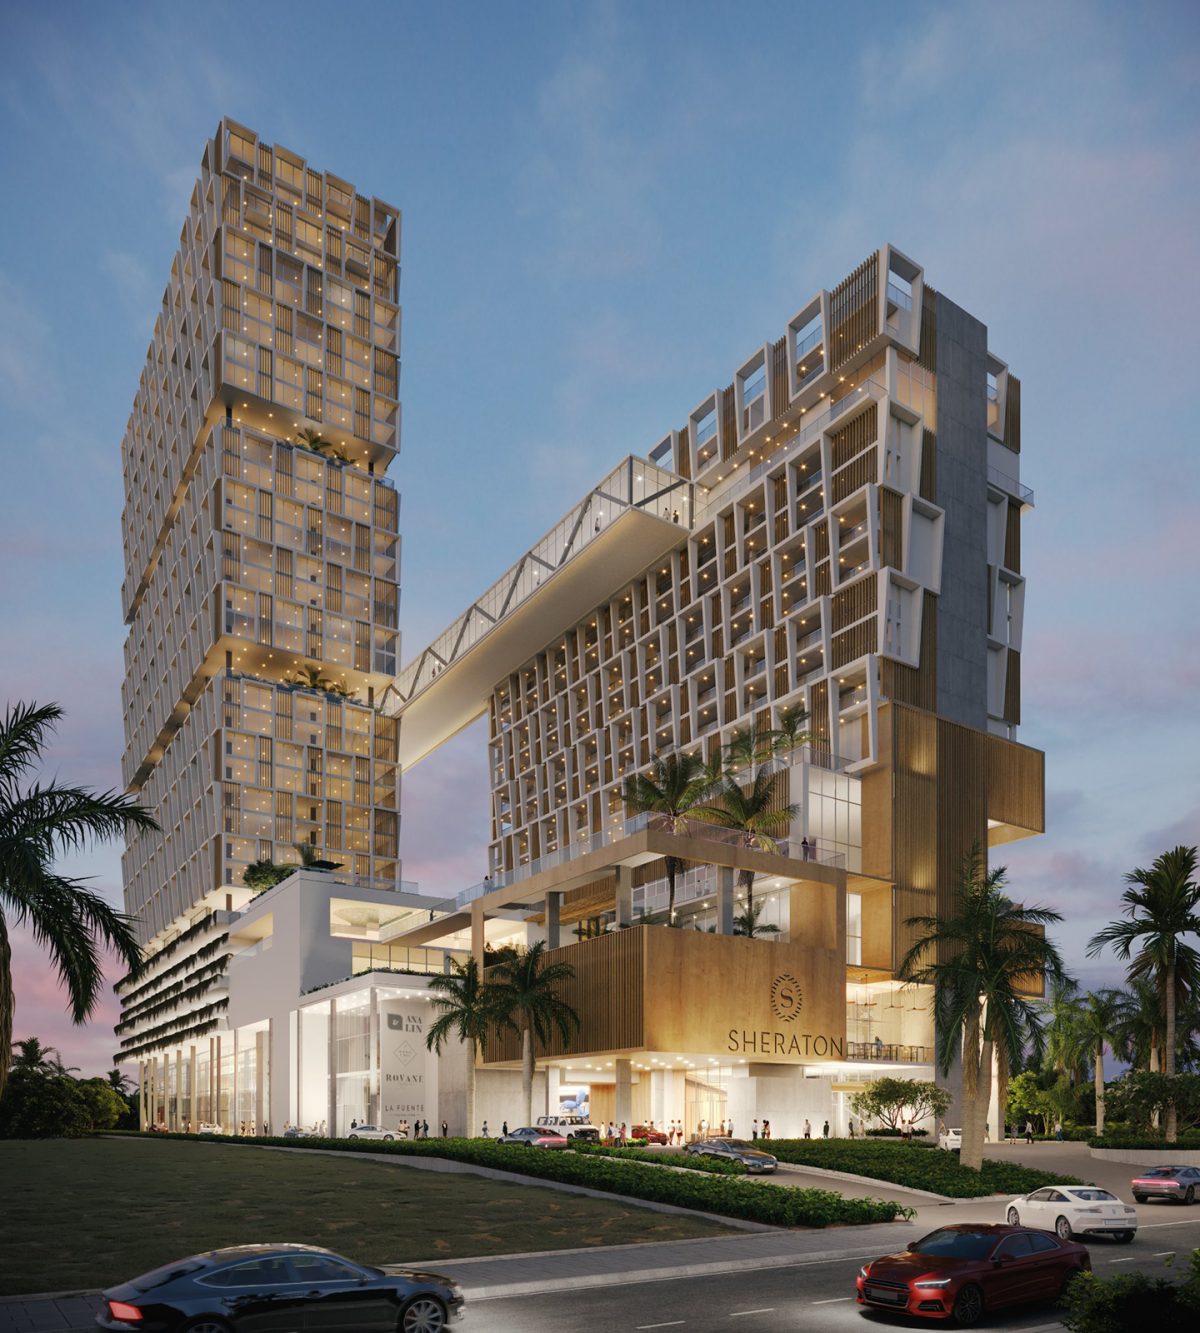 An artist’s impression of the Sheraton Hotel and Residences to be constructed 